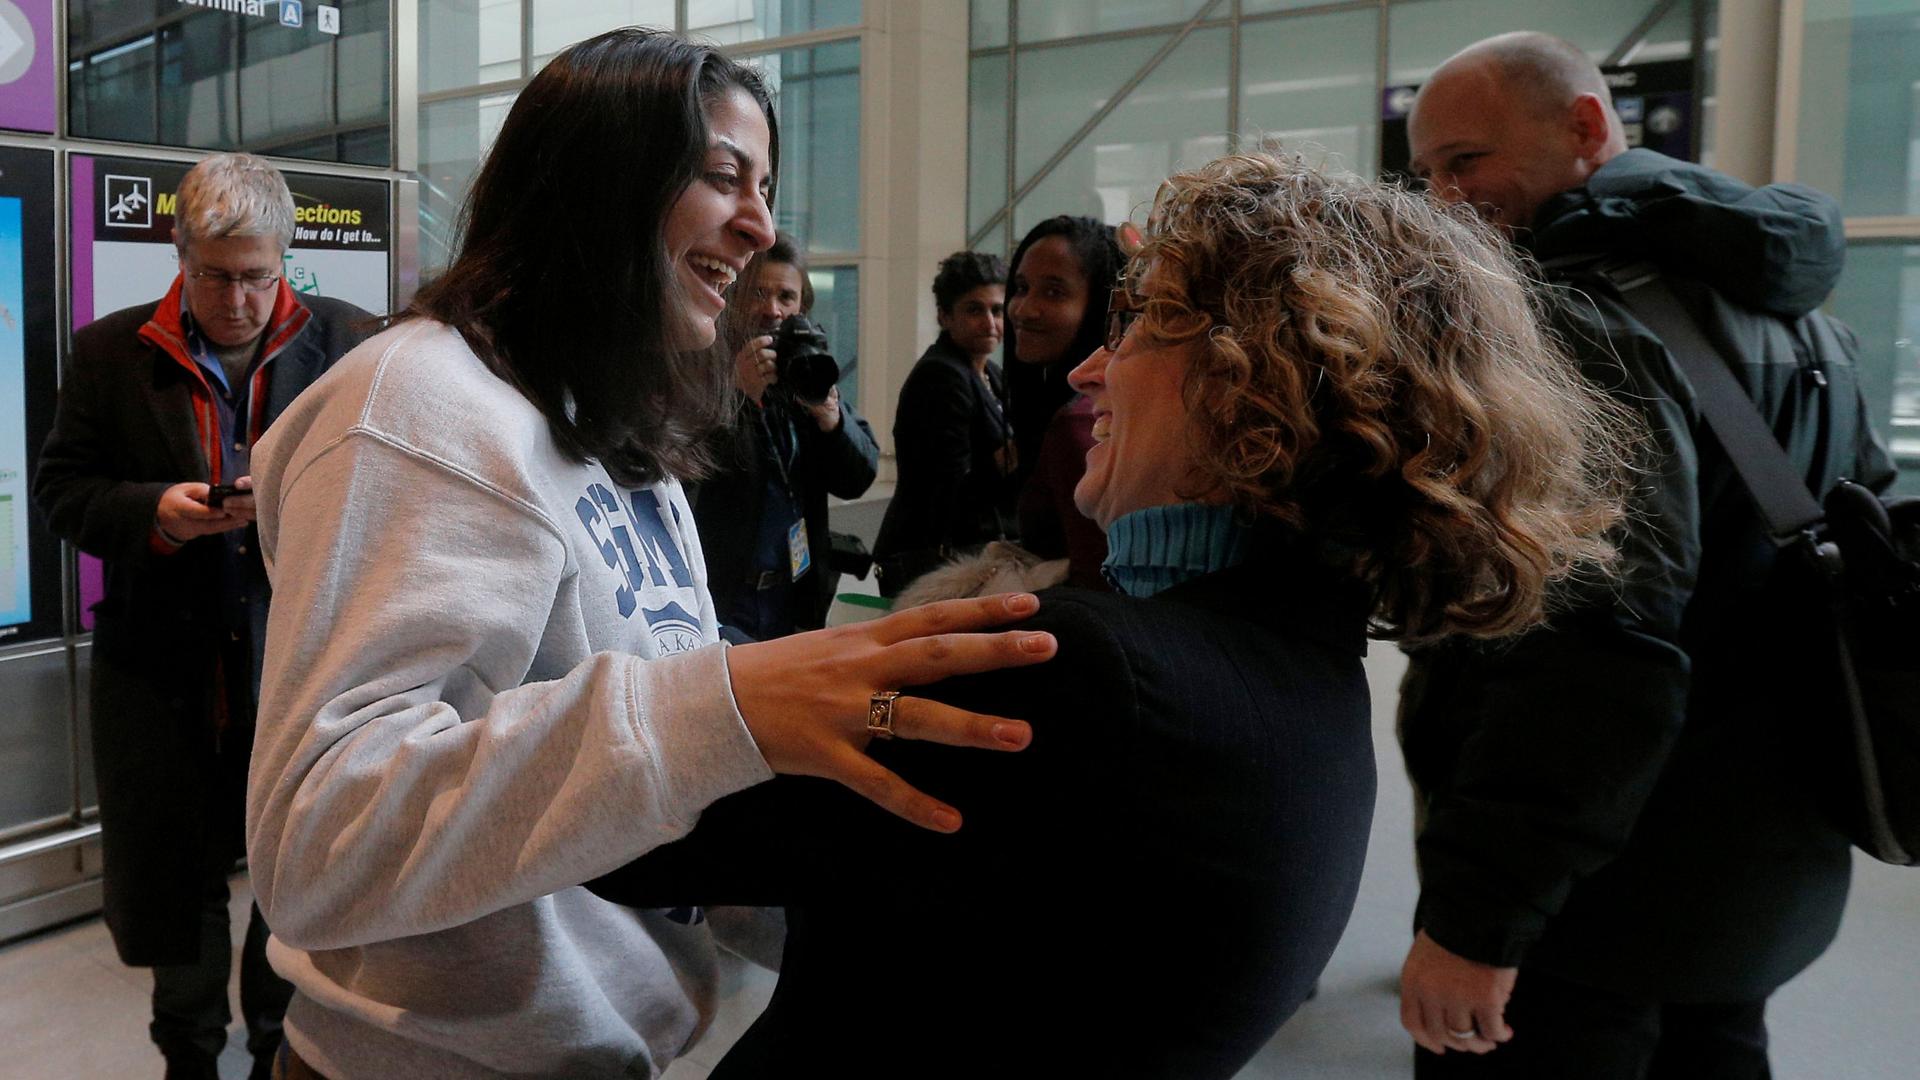 Niki Rahmati, a student at the Massachusetts Institute of Technology (MIT) from Iran, is greeted by immigration attorney Susan Church (R) at Logan Airport in Boston, MA.